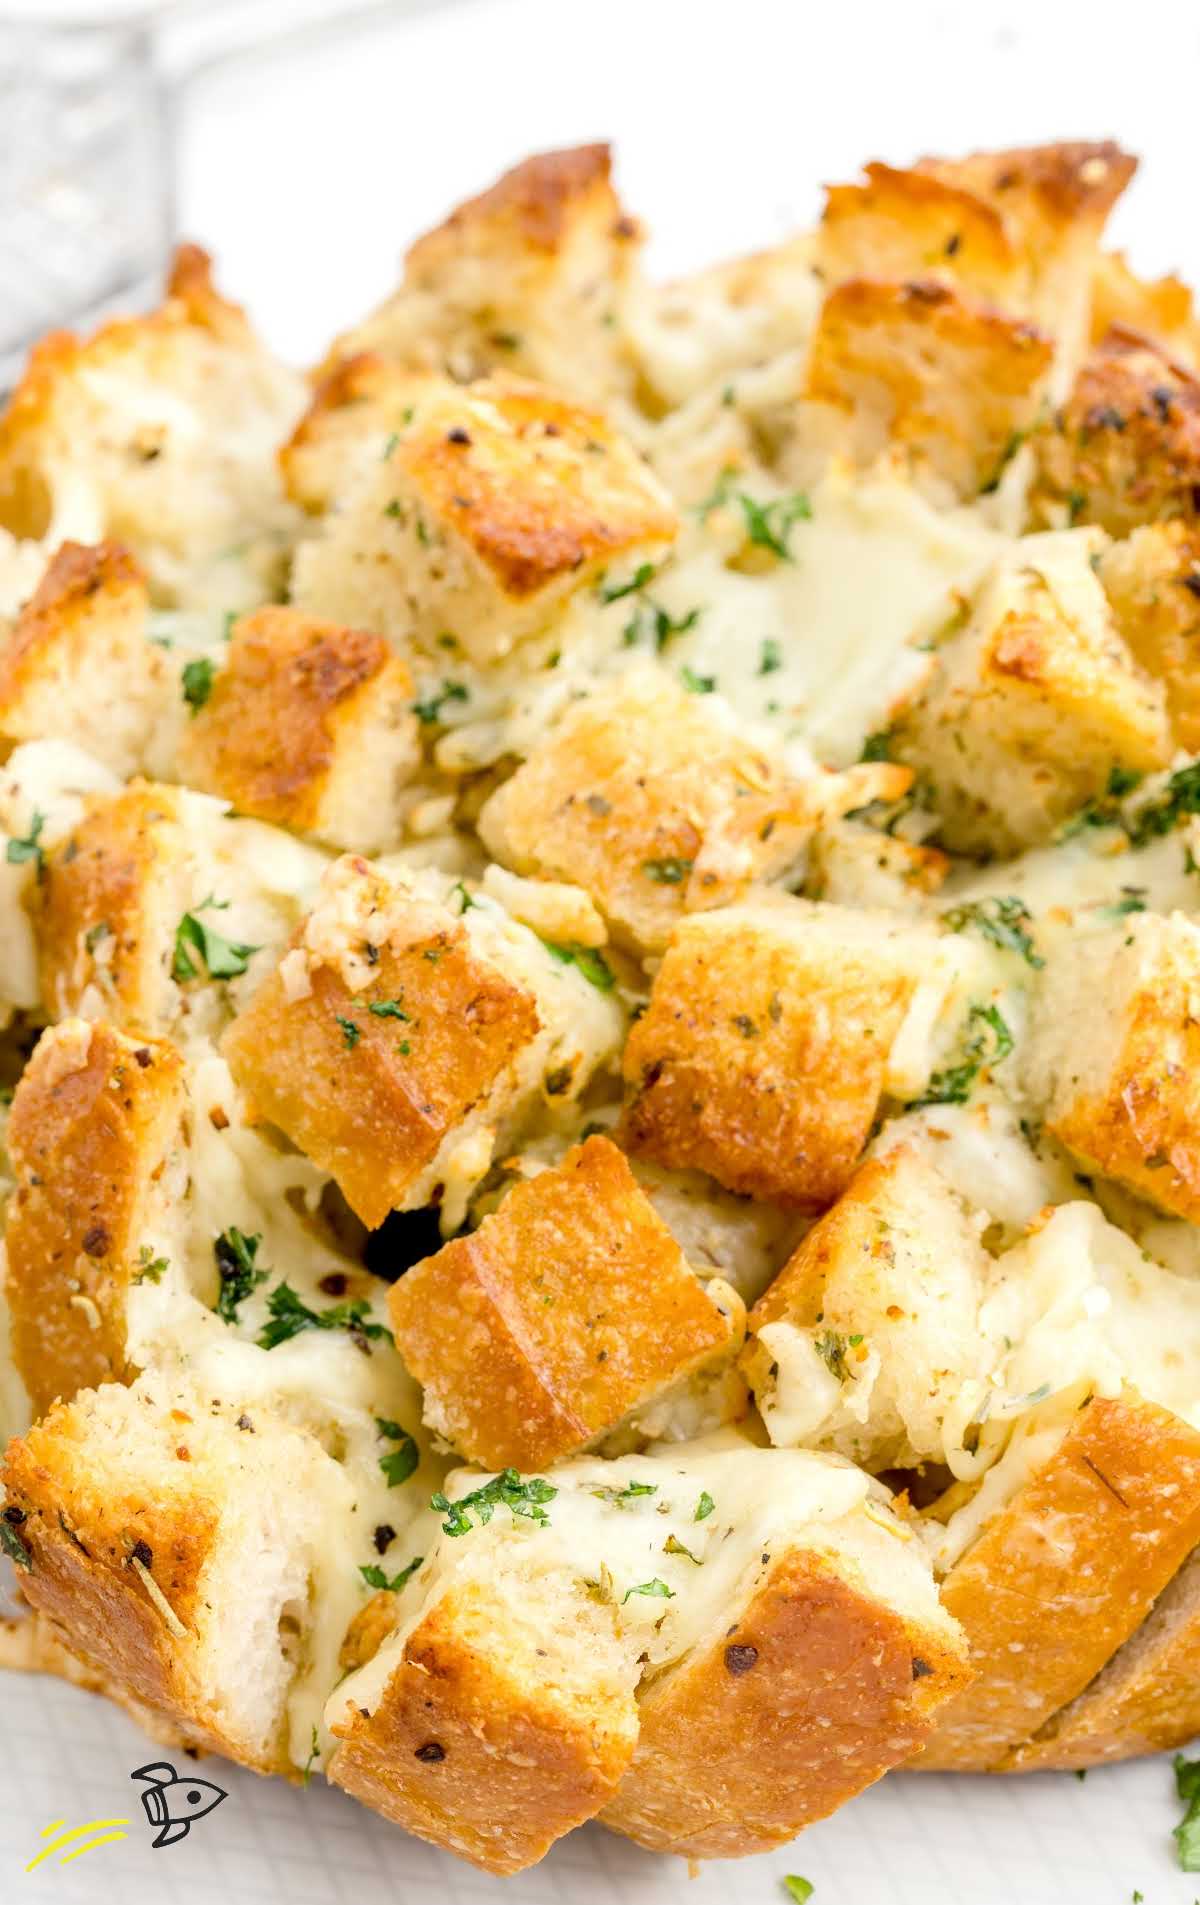 close up shot of cheesy pull-apart bread garnished with parsley